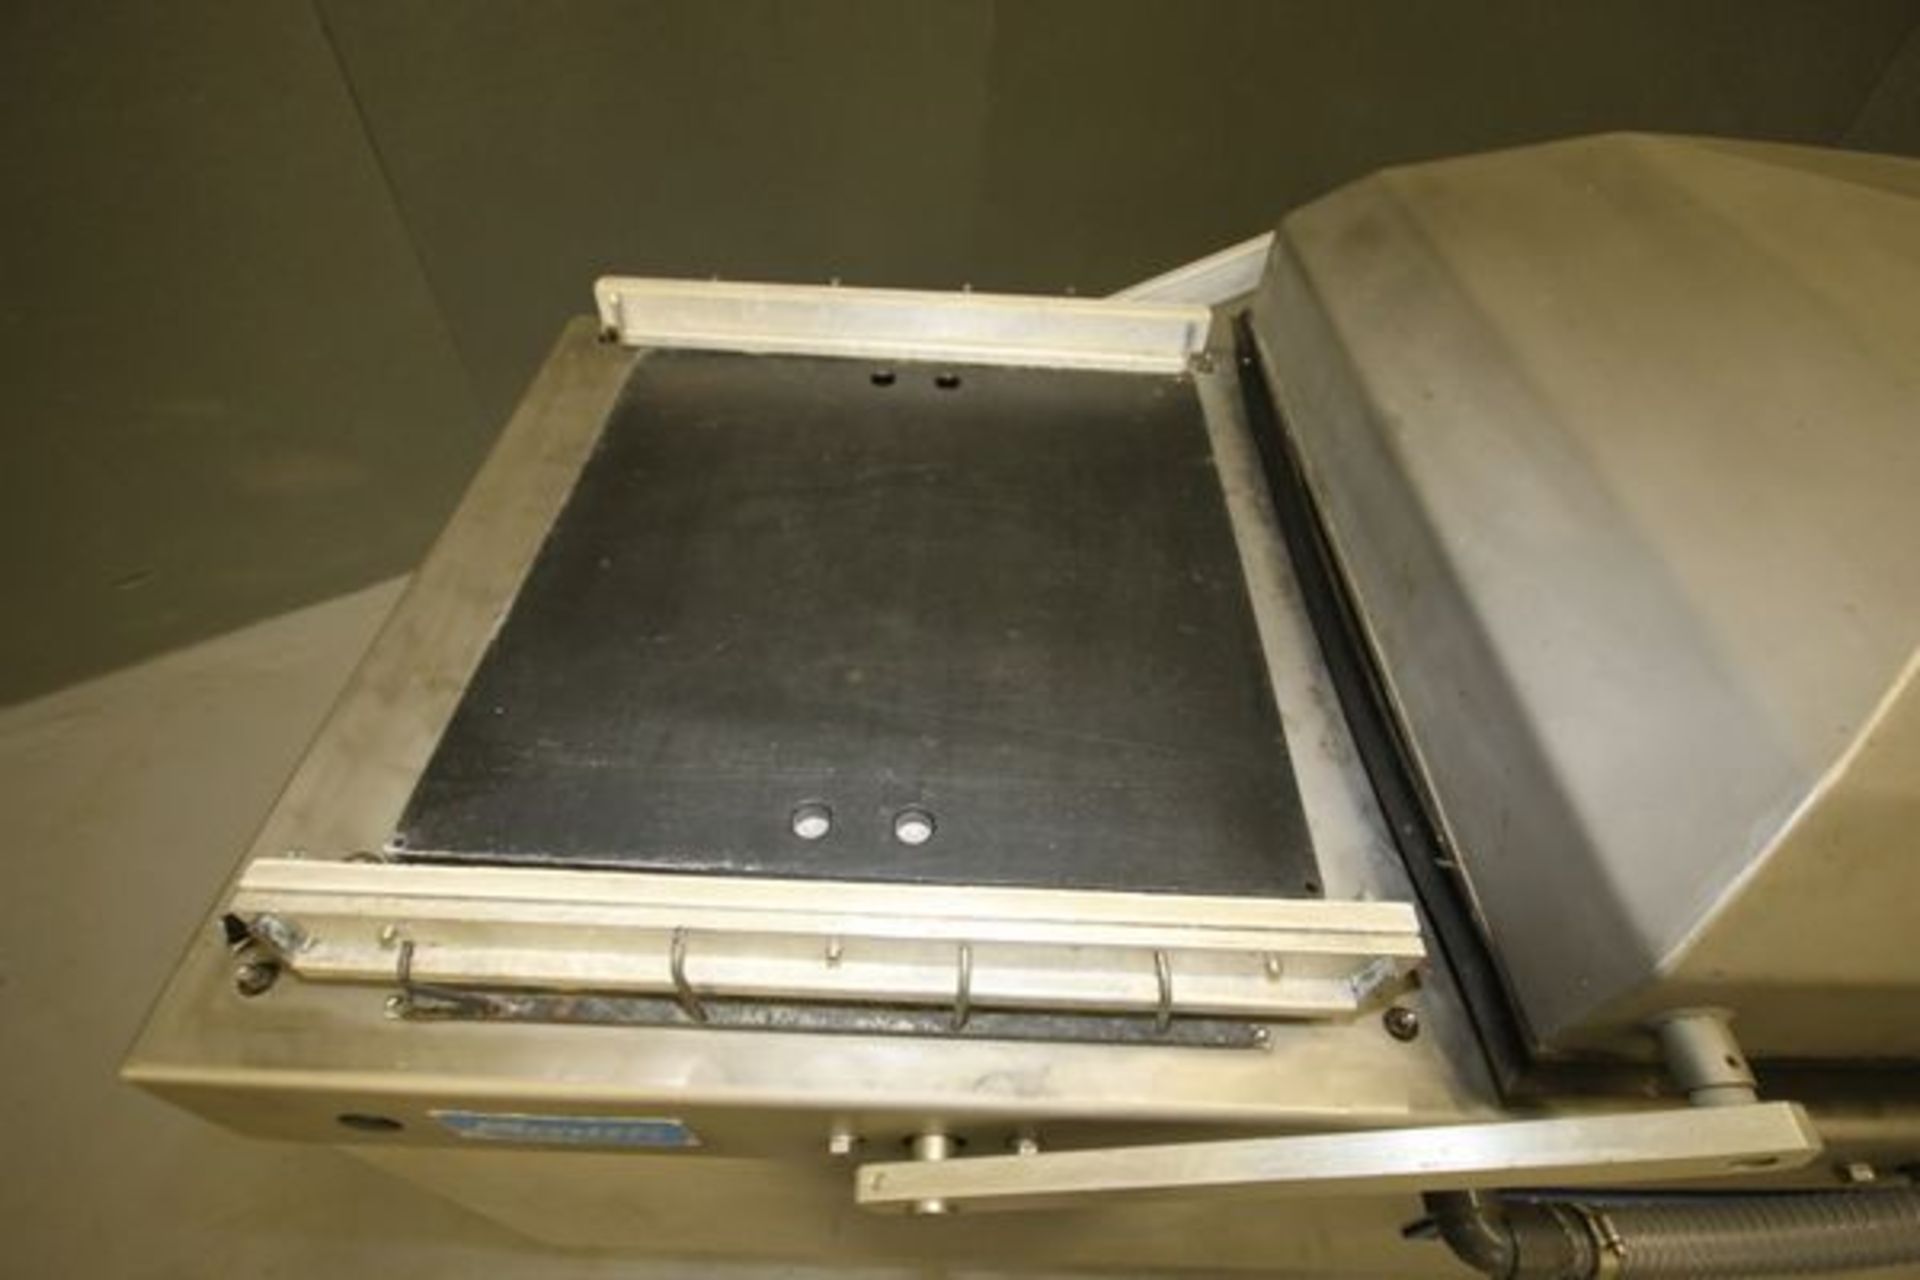 Smith SuperVac Dual Vacuum Sealer, Type GK290 with Seal Platform Dimension: Aprox. 24" x 24", 460 - Image 3 of 8